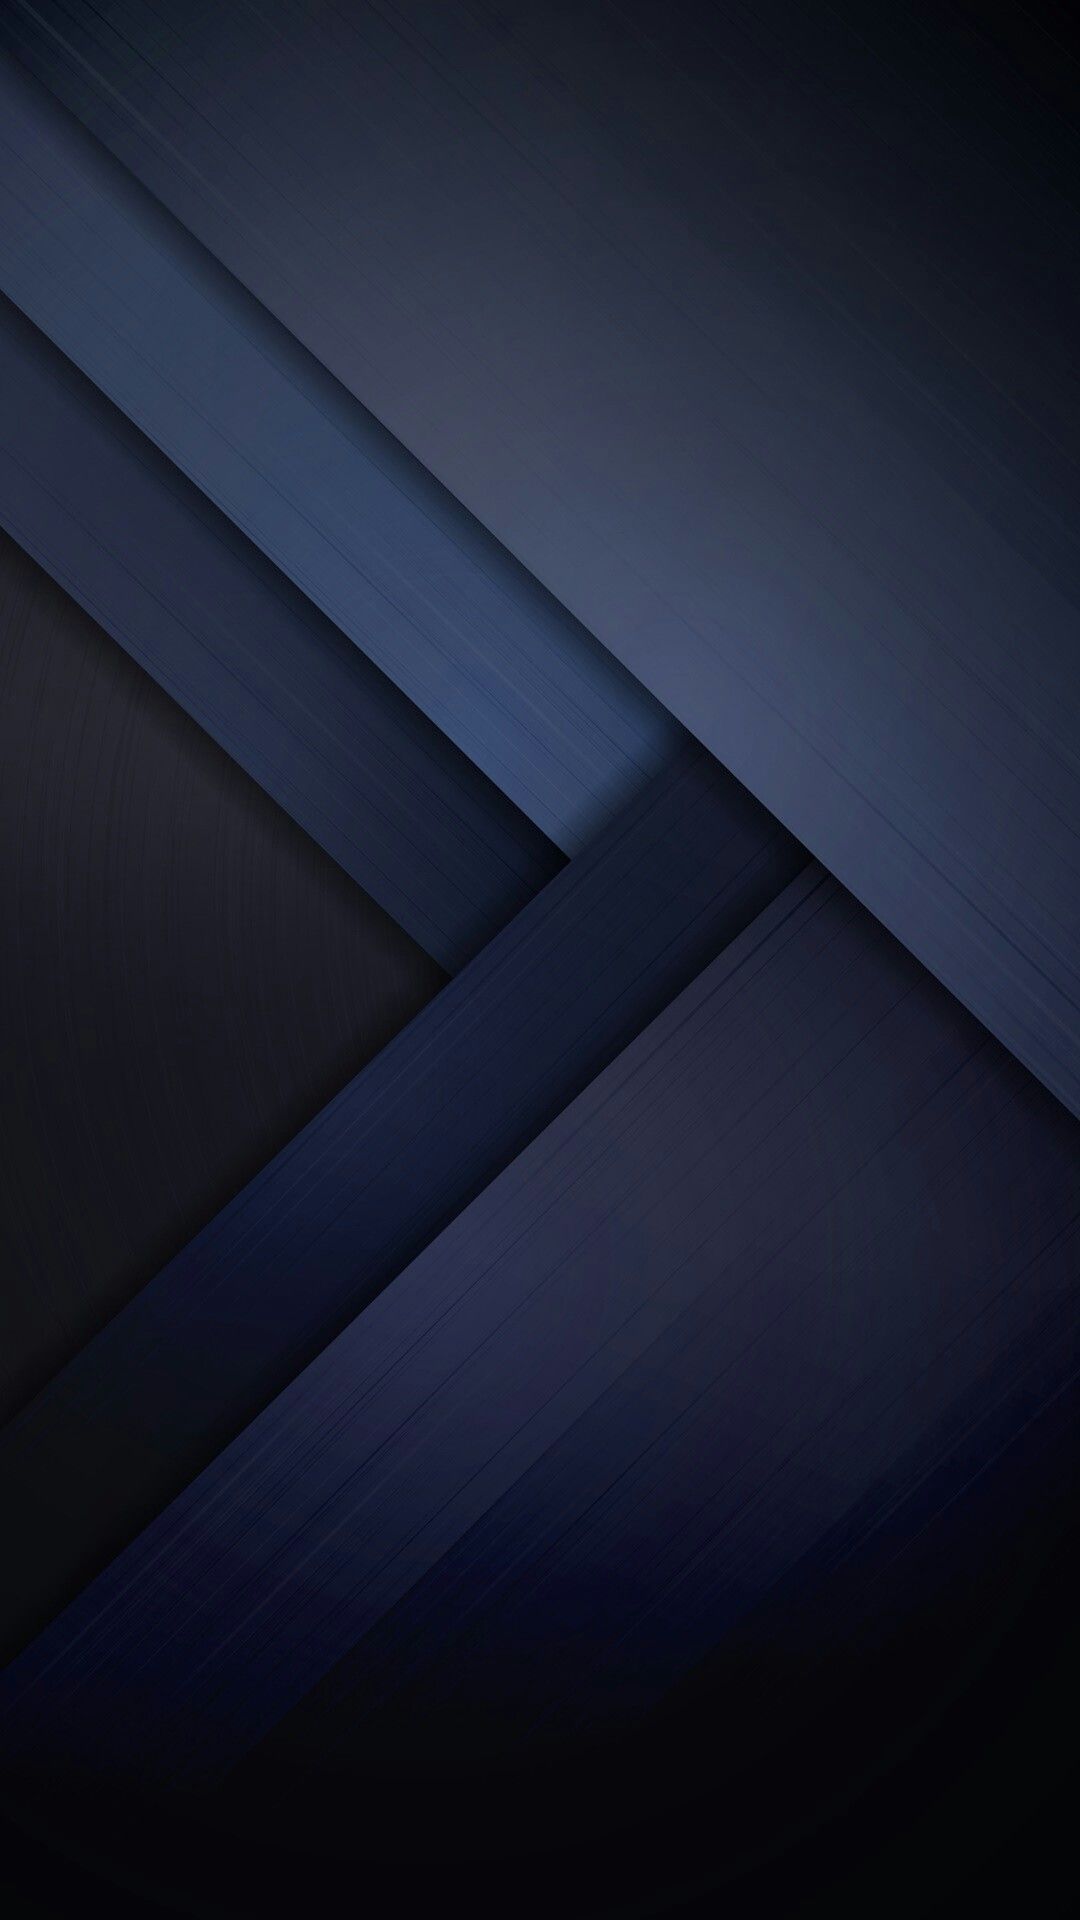 Blue Grey Background Picture. Samsung wallpaper, HD wallpaper pattern, Cool wallpaper for phones